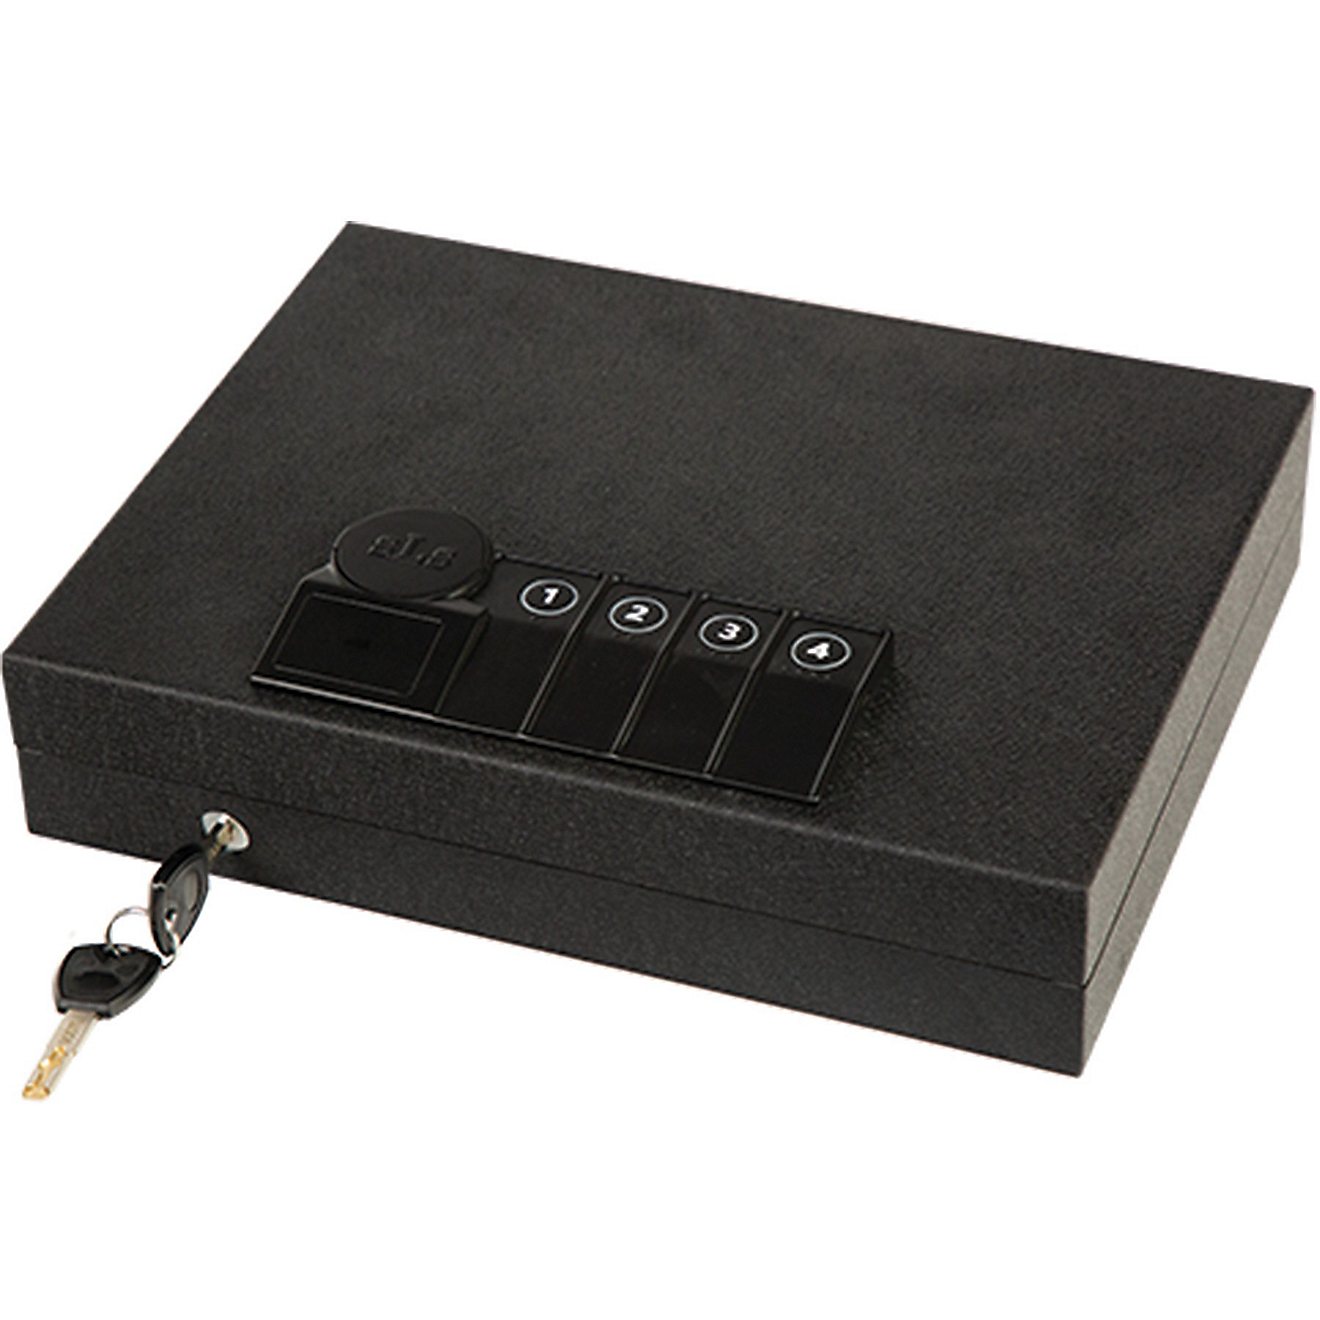 SureLock Security Vaults Model Quicktouch 100 Digital Safe                                                                       - view number 1